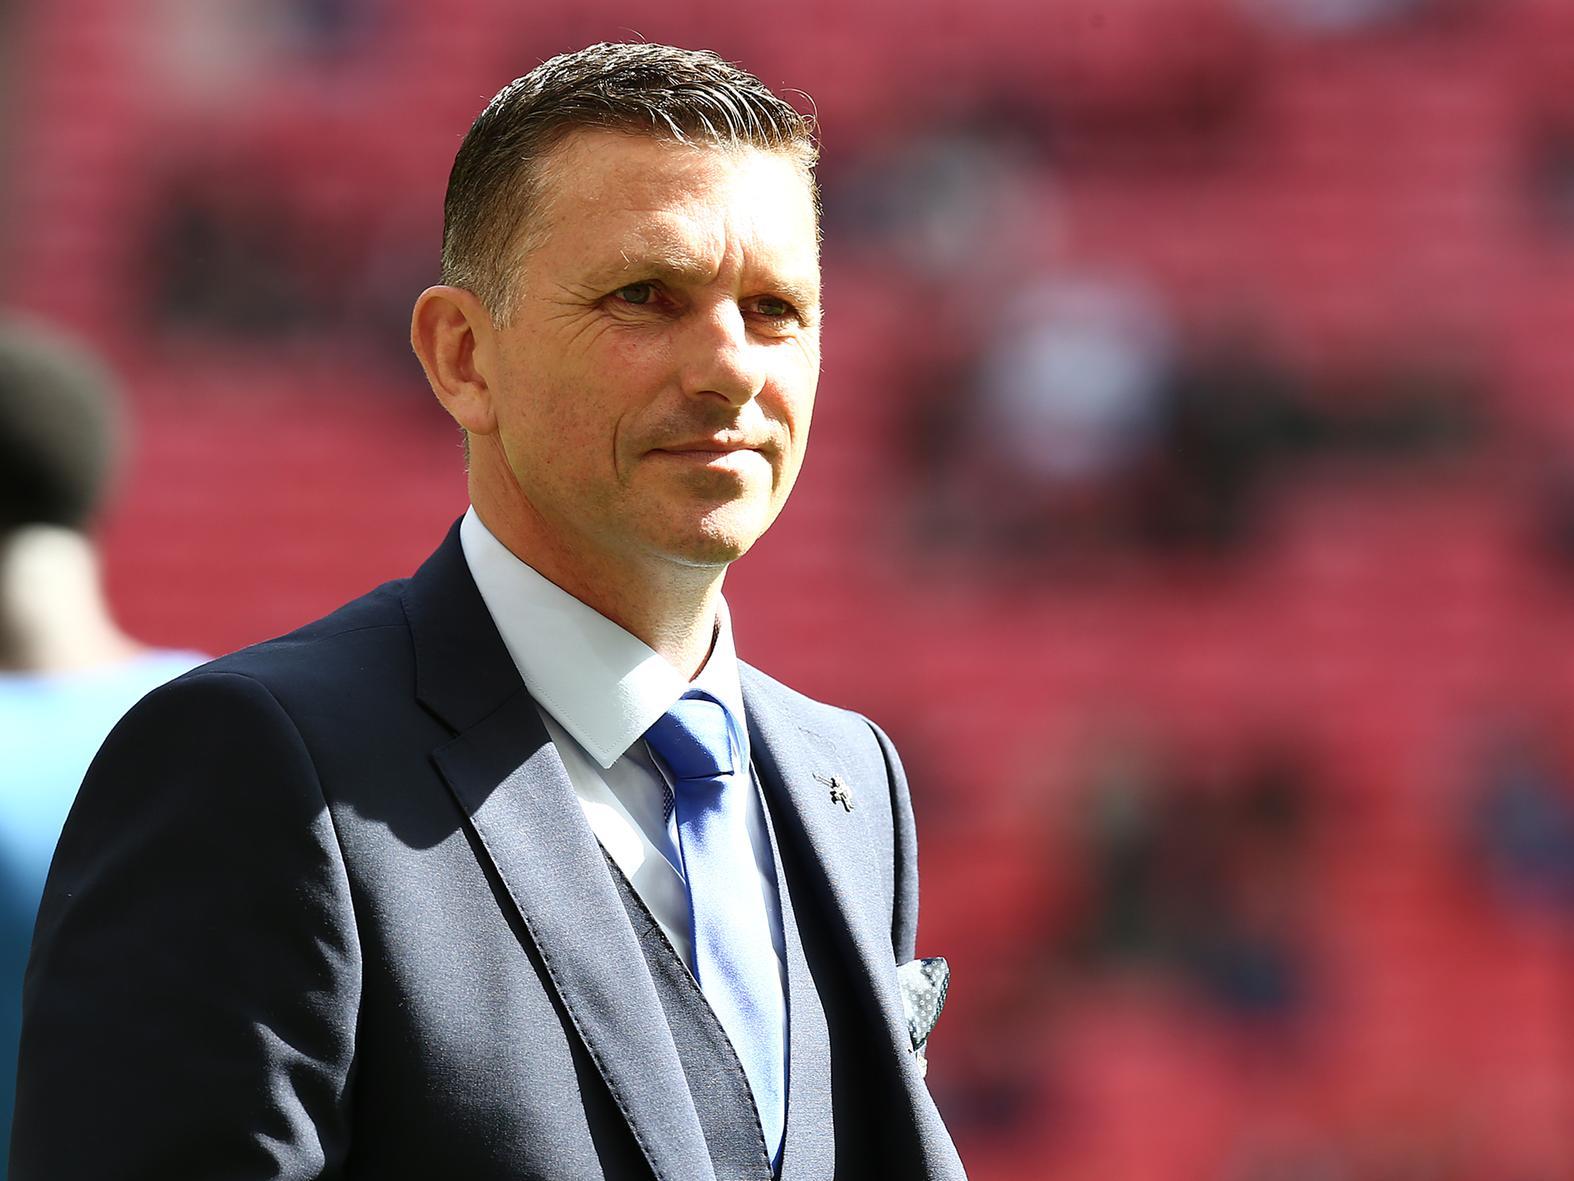 Port Vale boss John Askey has explained he may try and sign a couple of players on loan in January. (StokeOnTrentLive)